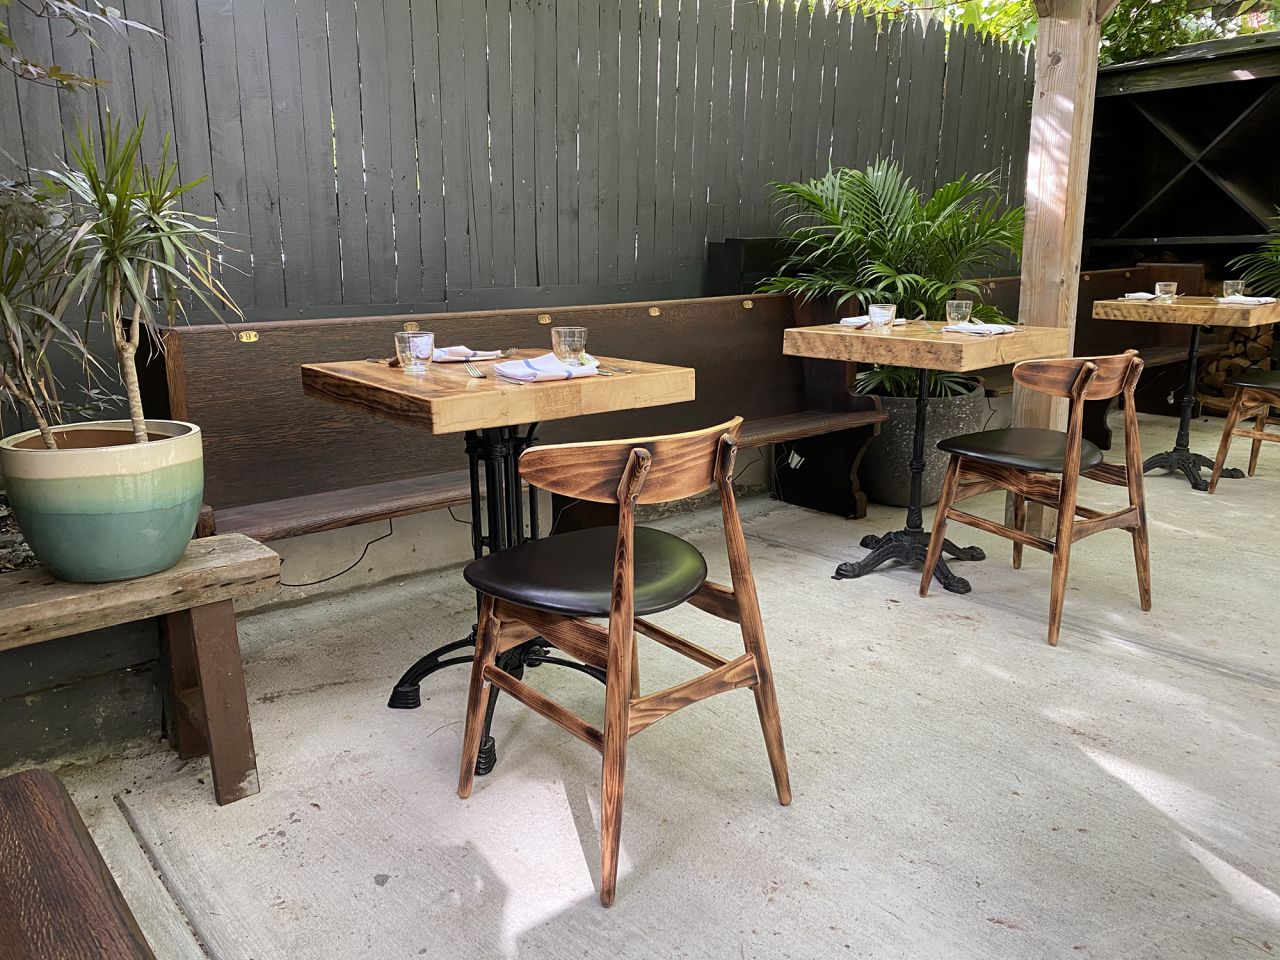 Claro's backyard is a lush space with socially distanced tables.